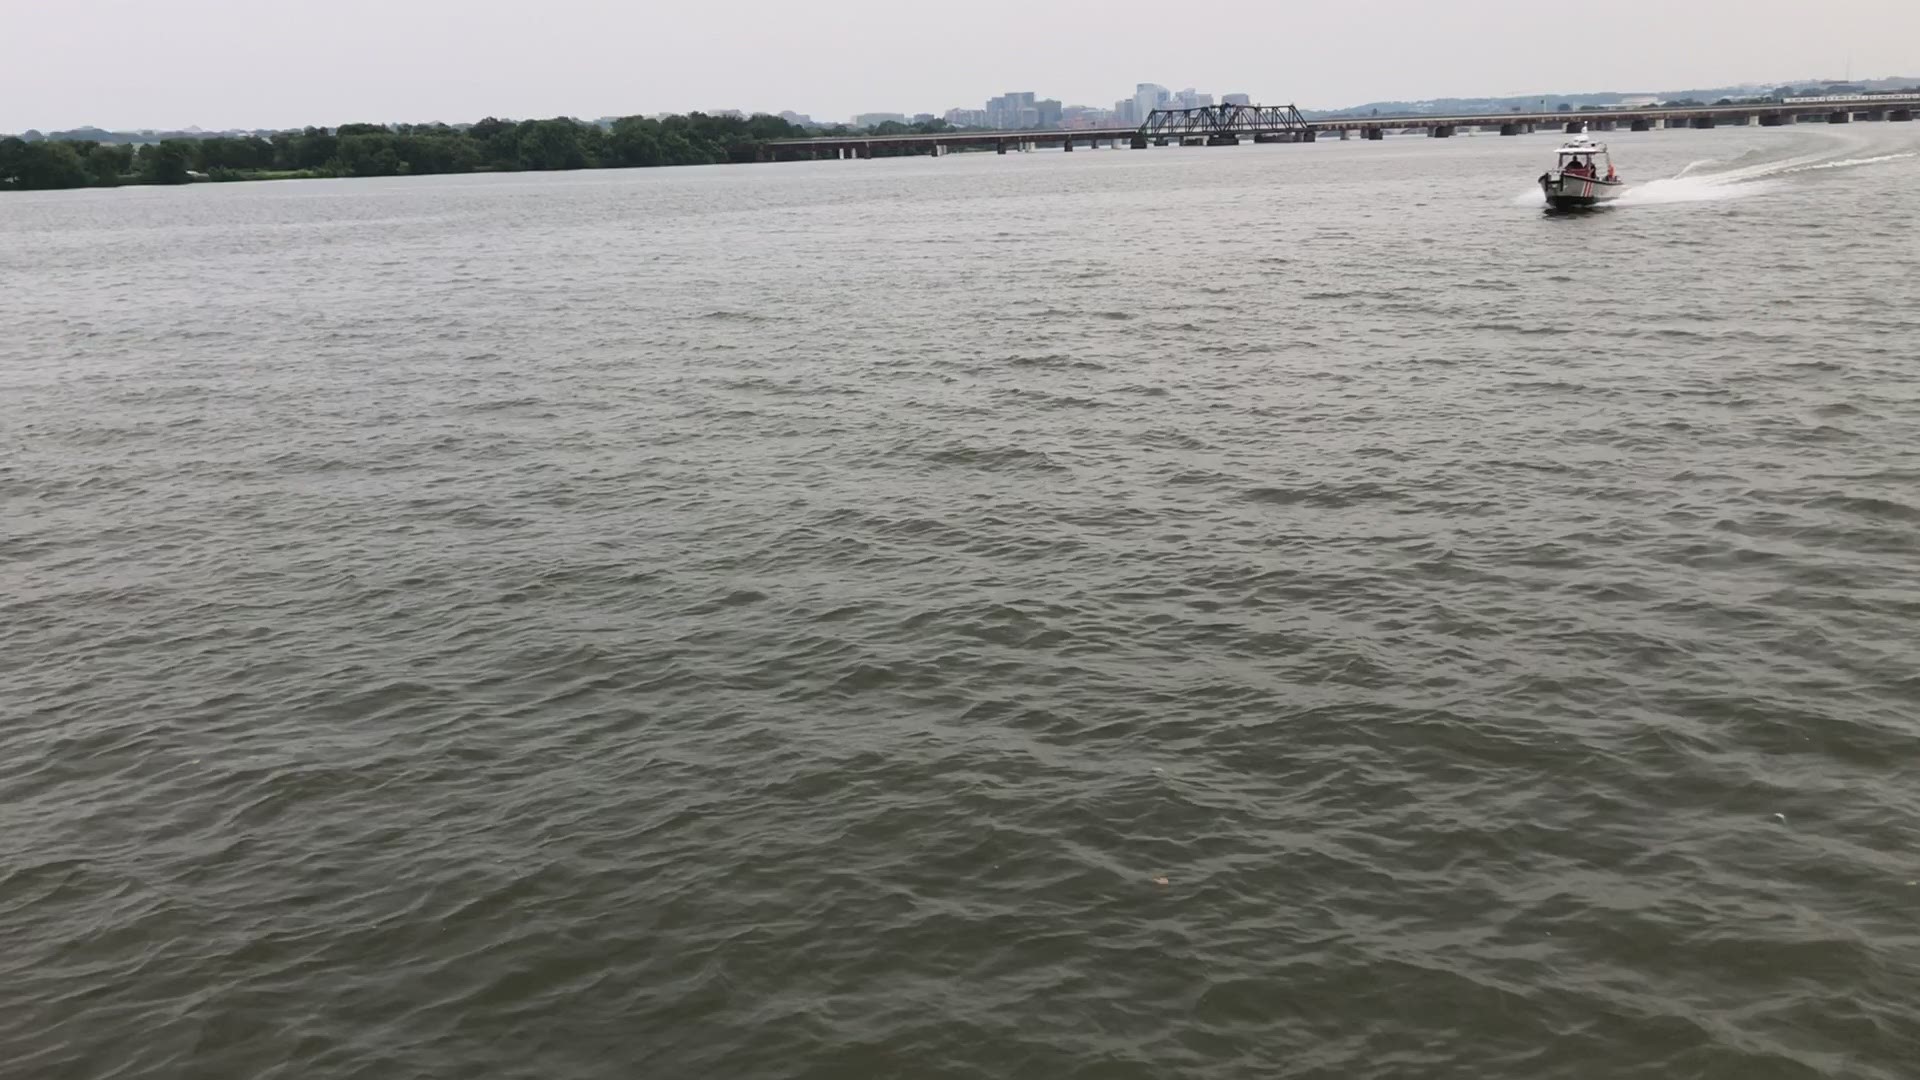 Swimming in the Potomac or Anacostia rivers is illegal and dangerous, according to a very concerned DC Fire and EMS.